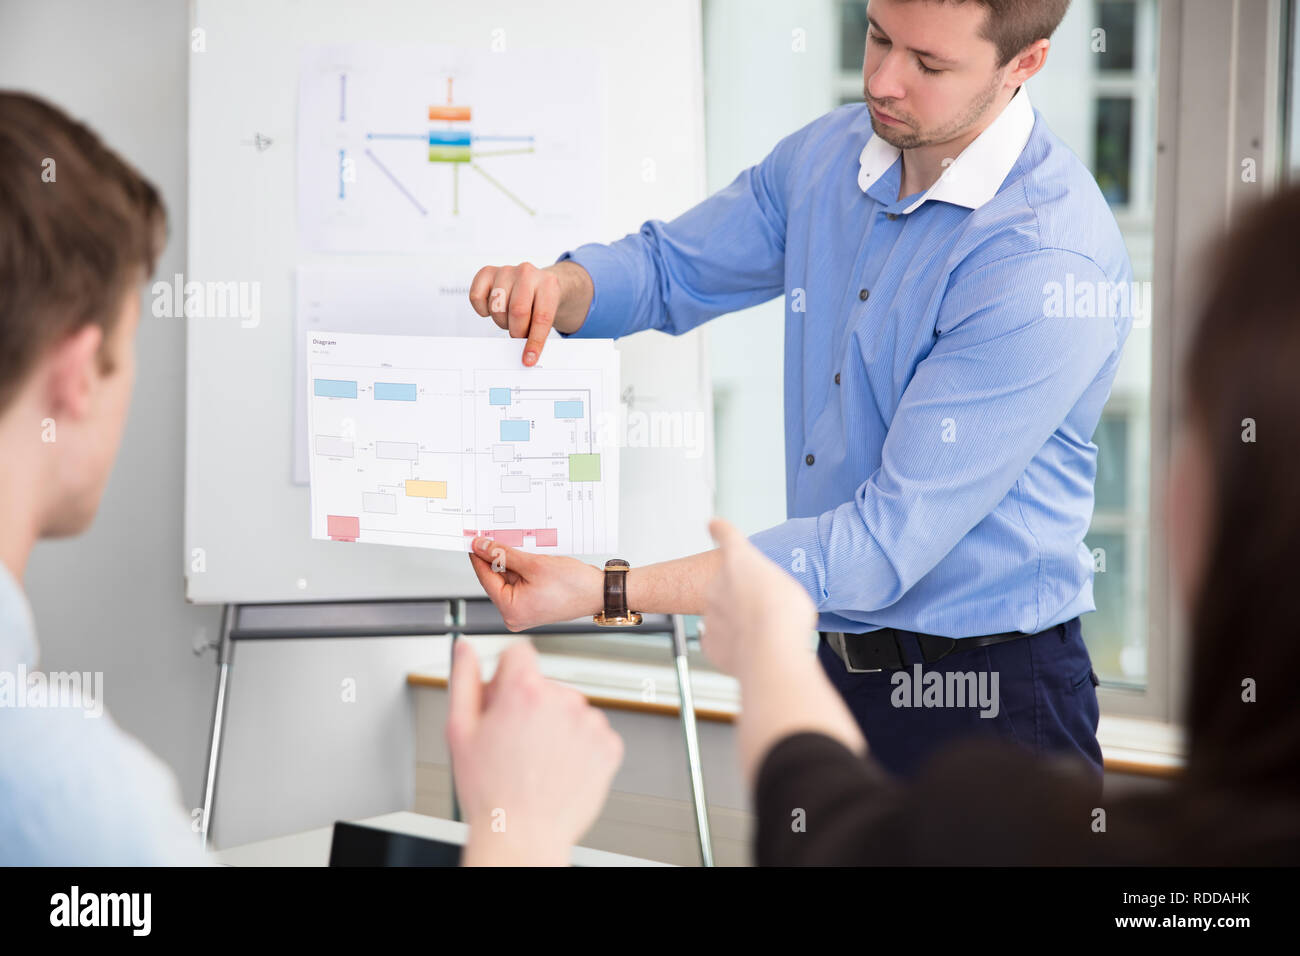 Businessman Showing Chart To Colleagues In Office Stock Photo